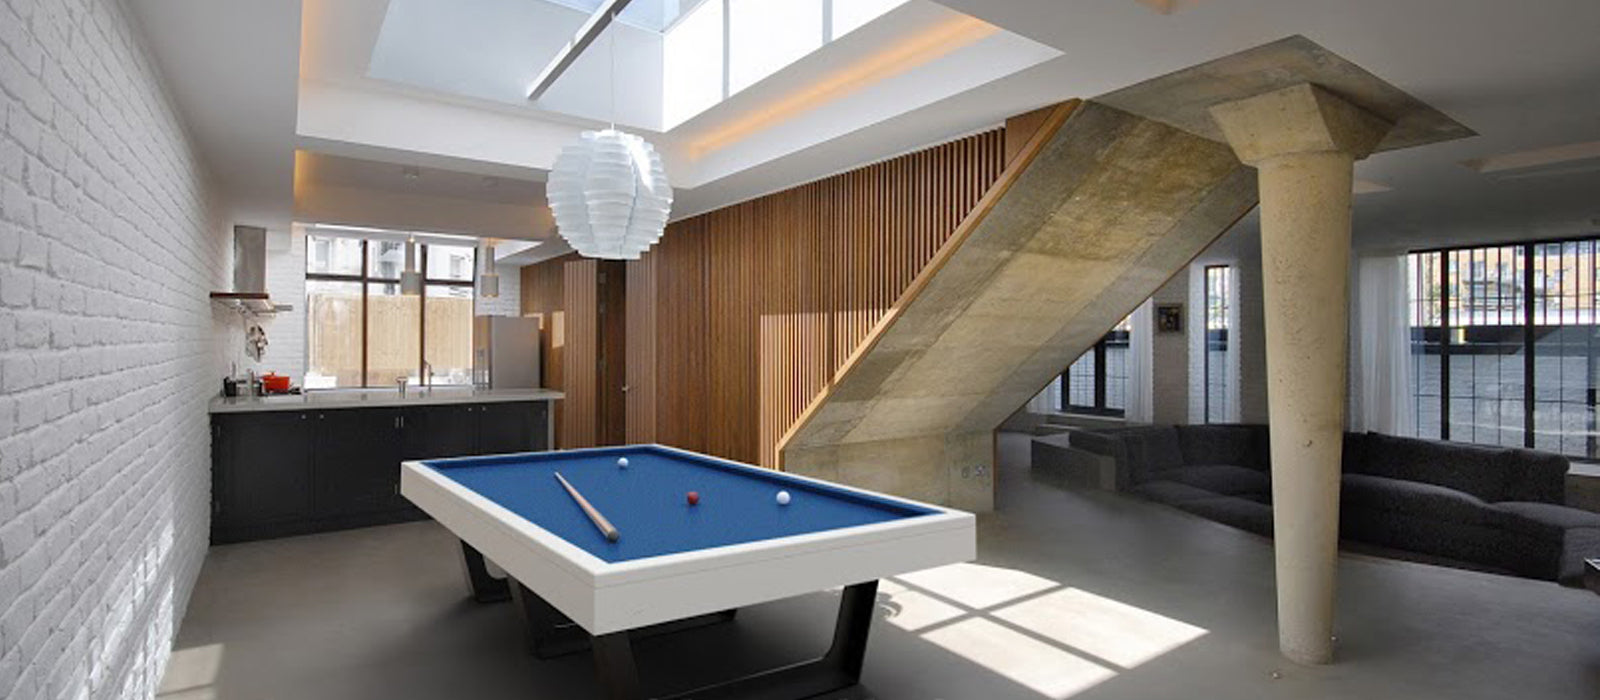 A modern pool table in a contemporary space